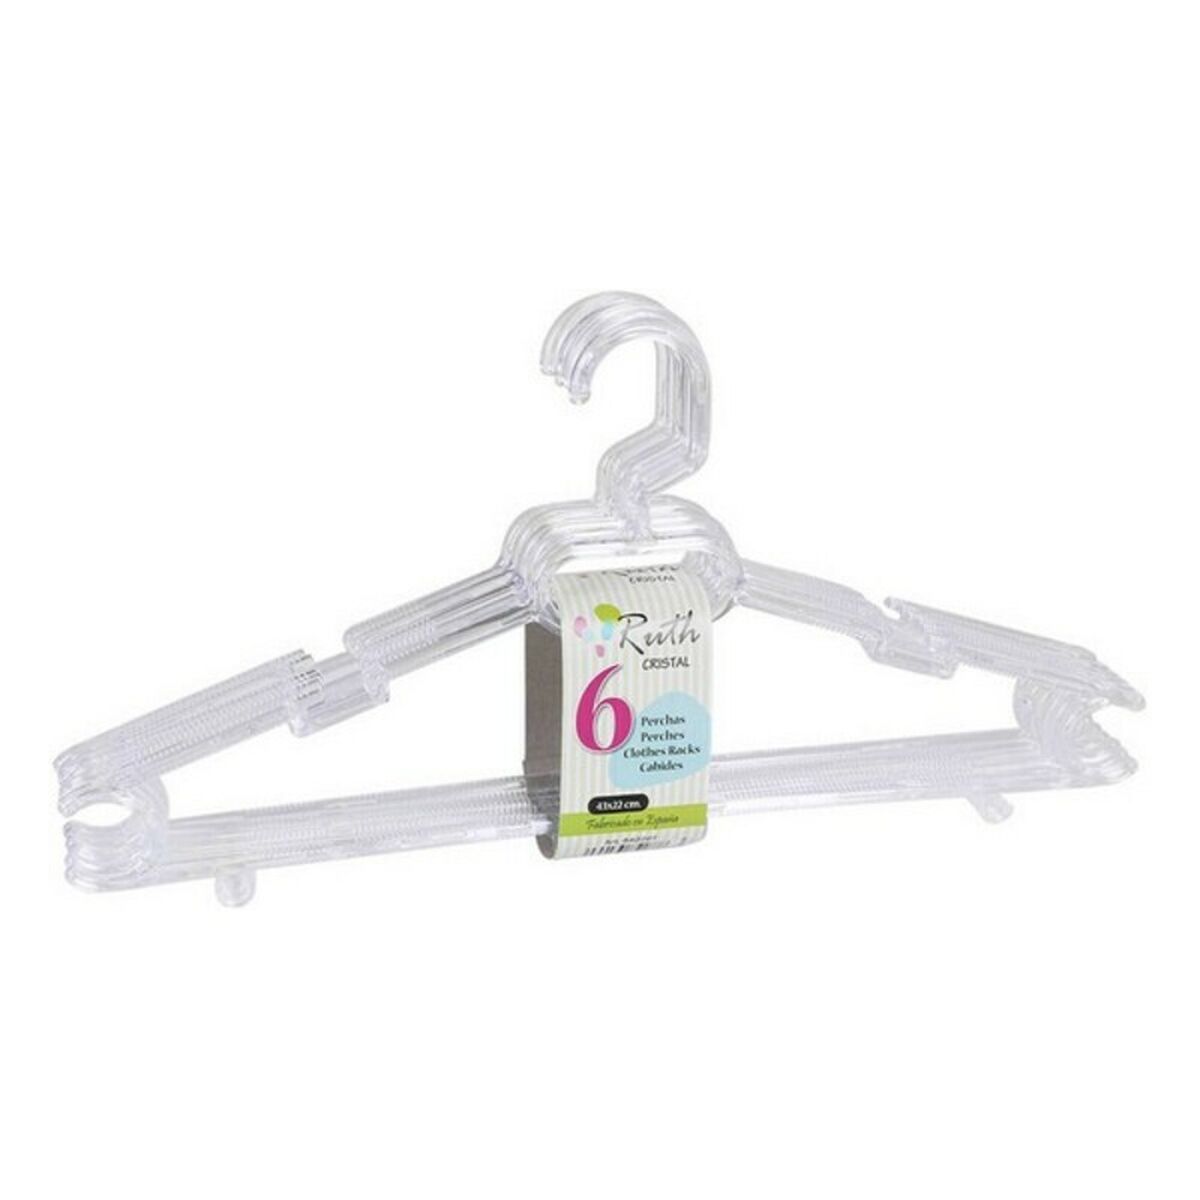 Hangers Ruth White (6 Uds)